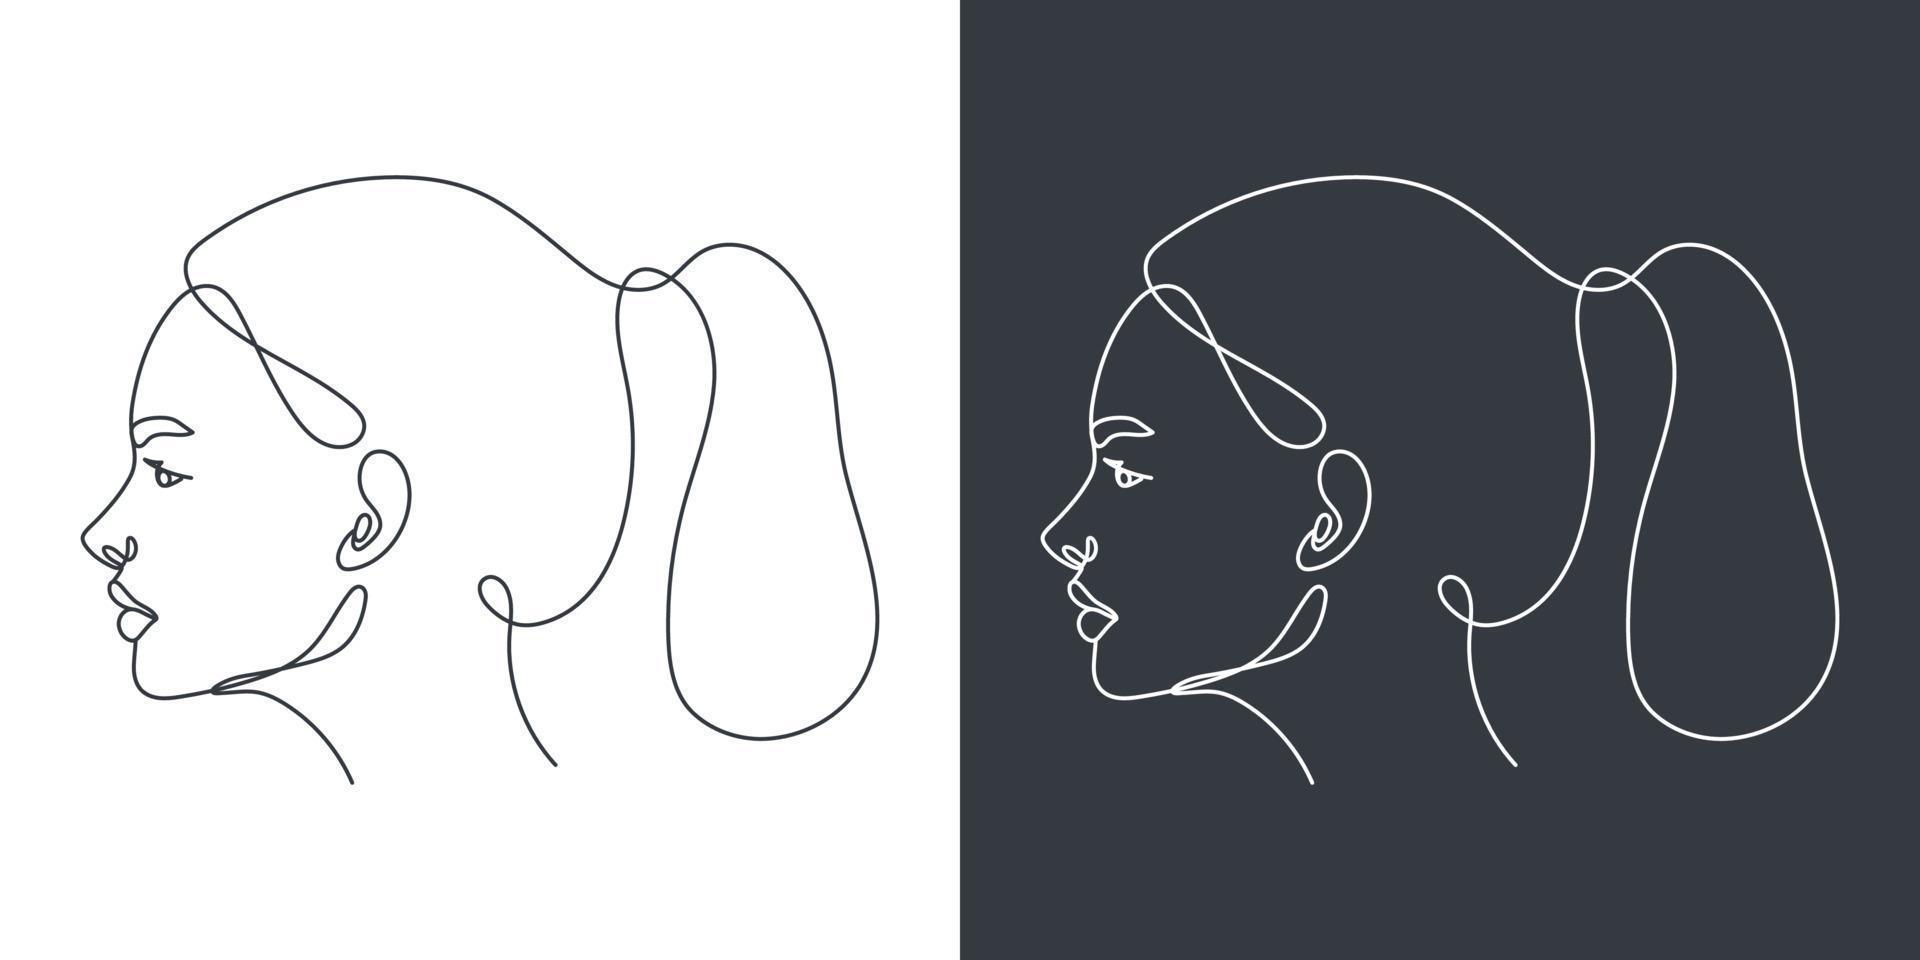 Women's faces in one line art style. One line art. Vector illustration